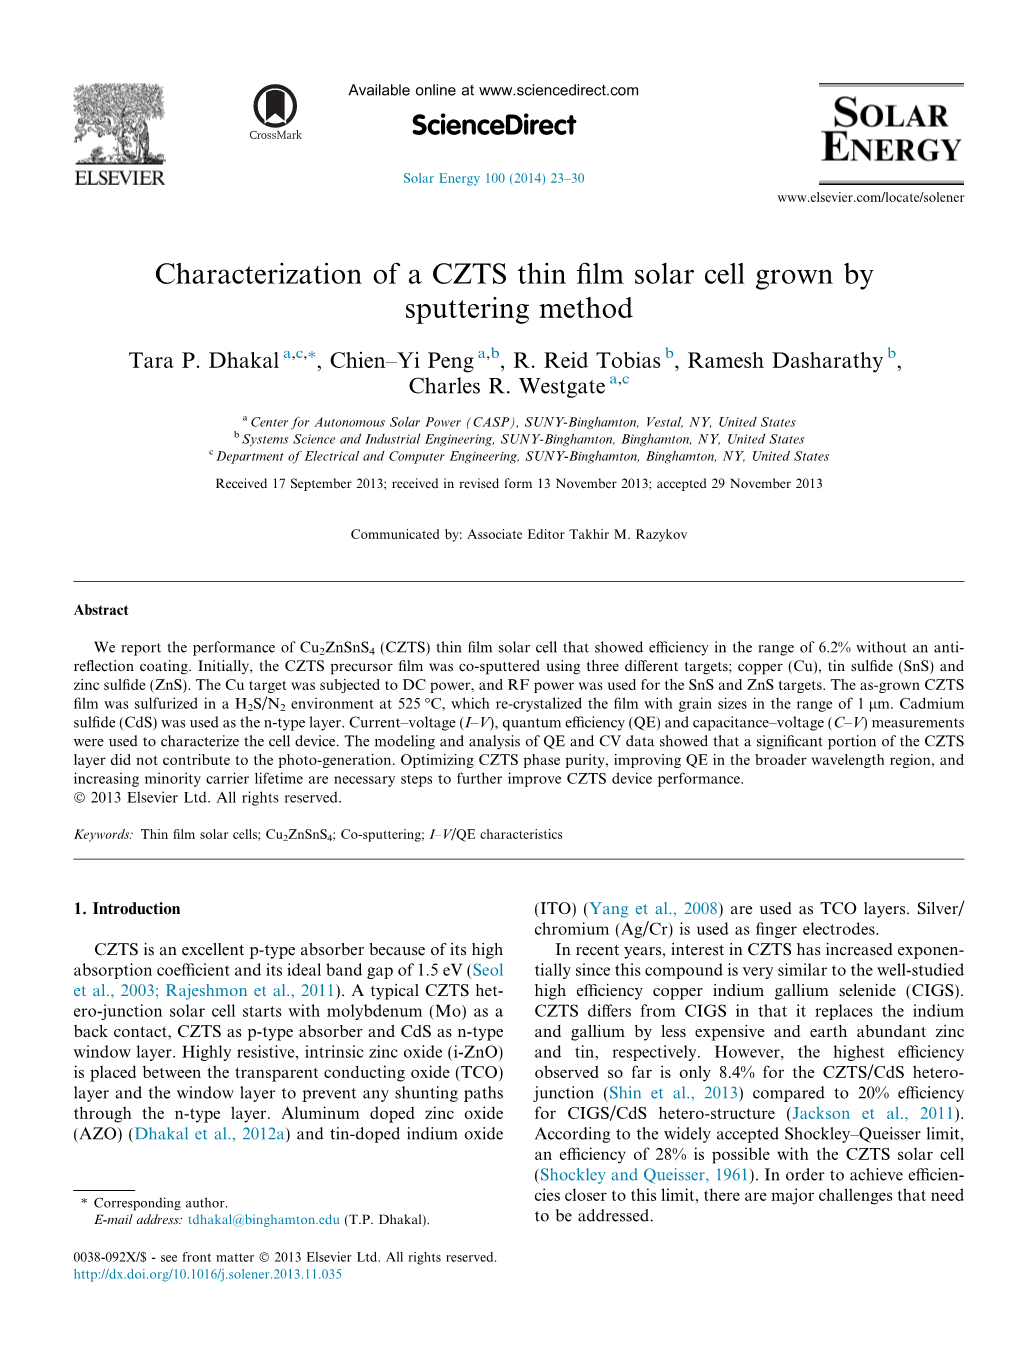 Characterization of a CZTS Thin Film Solar Cell Grown by Sputtering Method